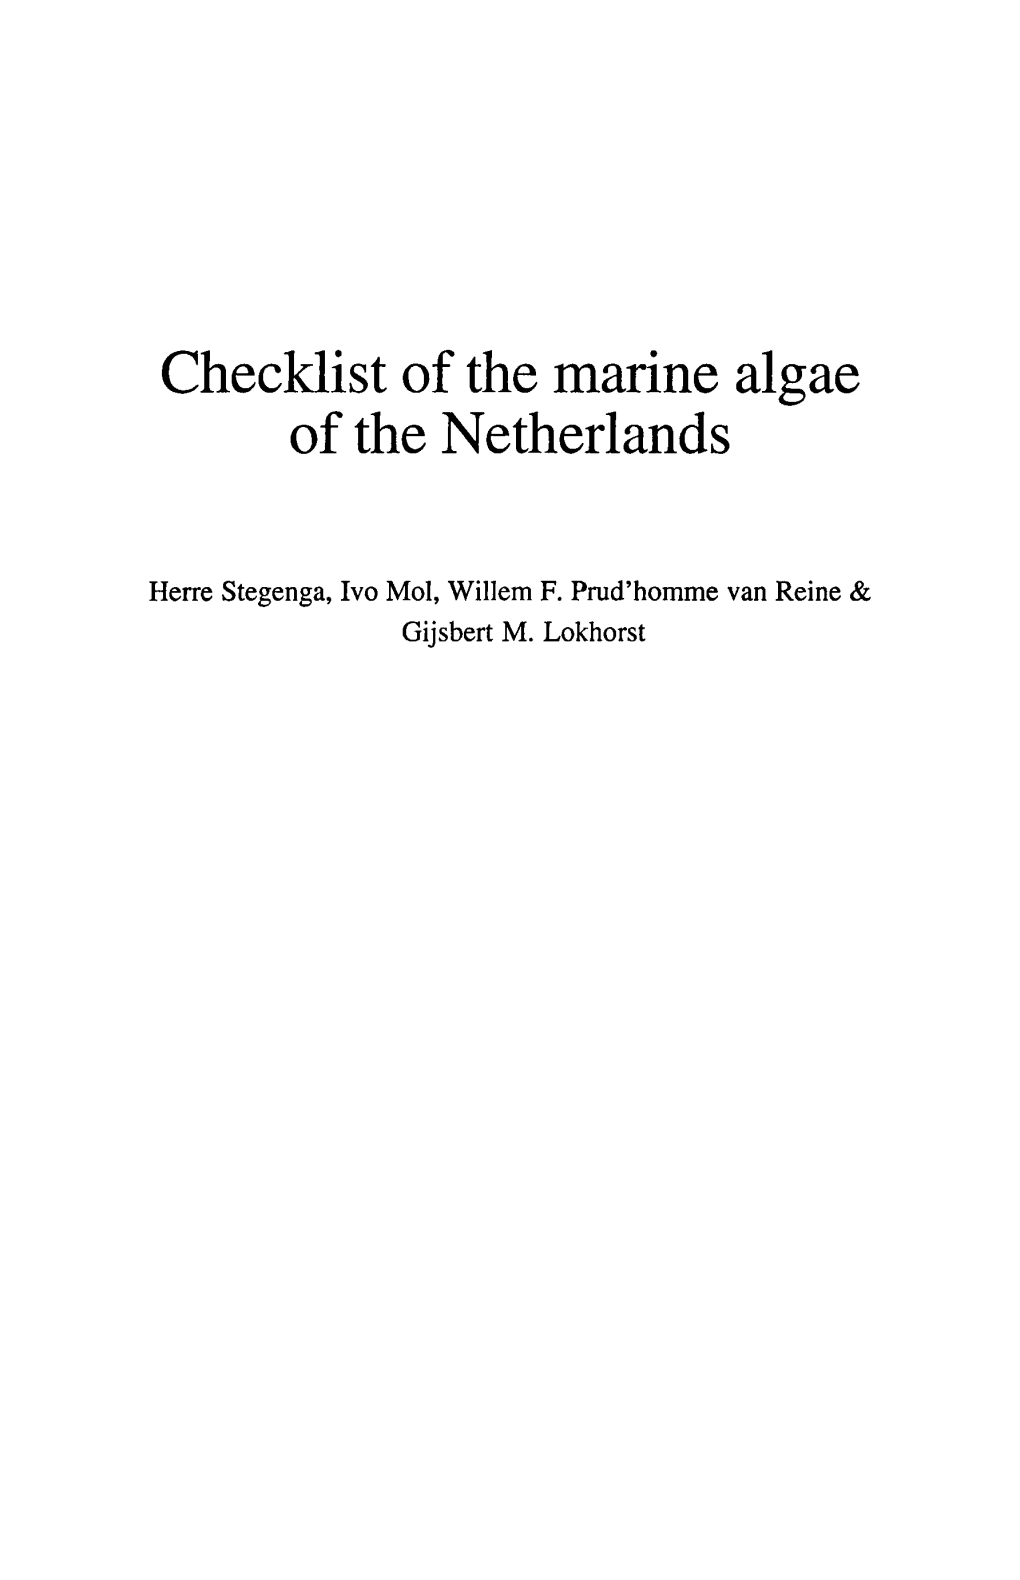 Checklist of the Marine of the Netherlands